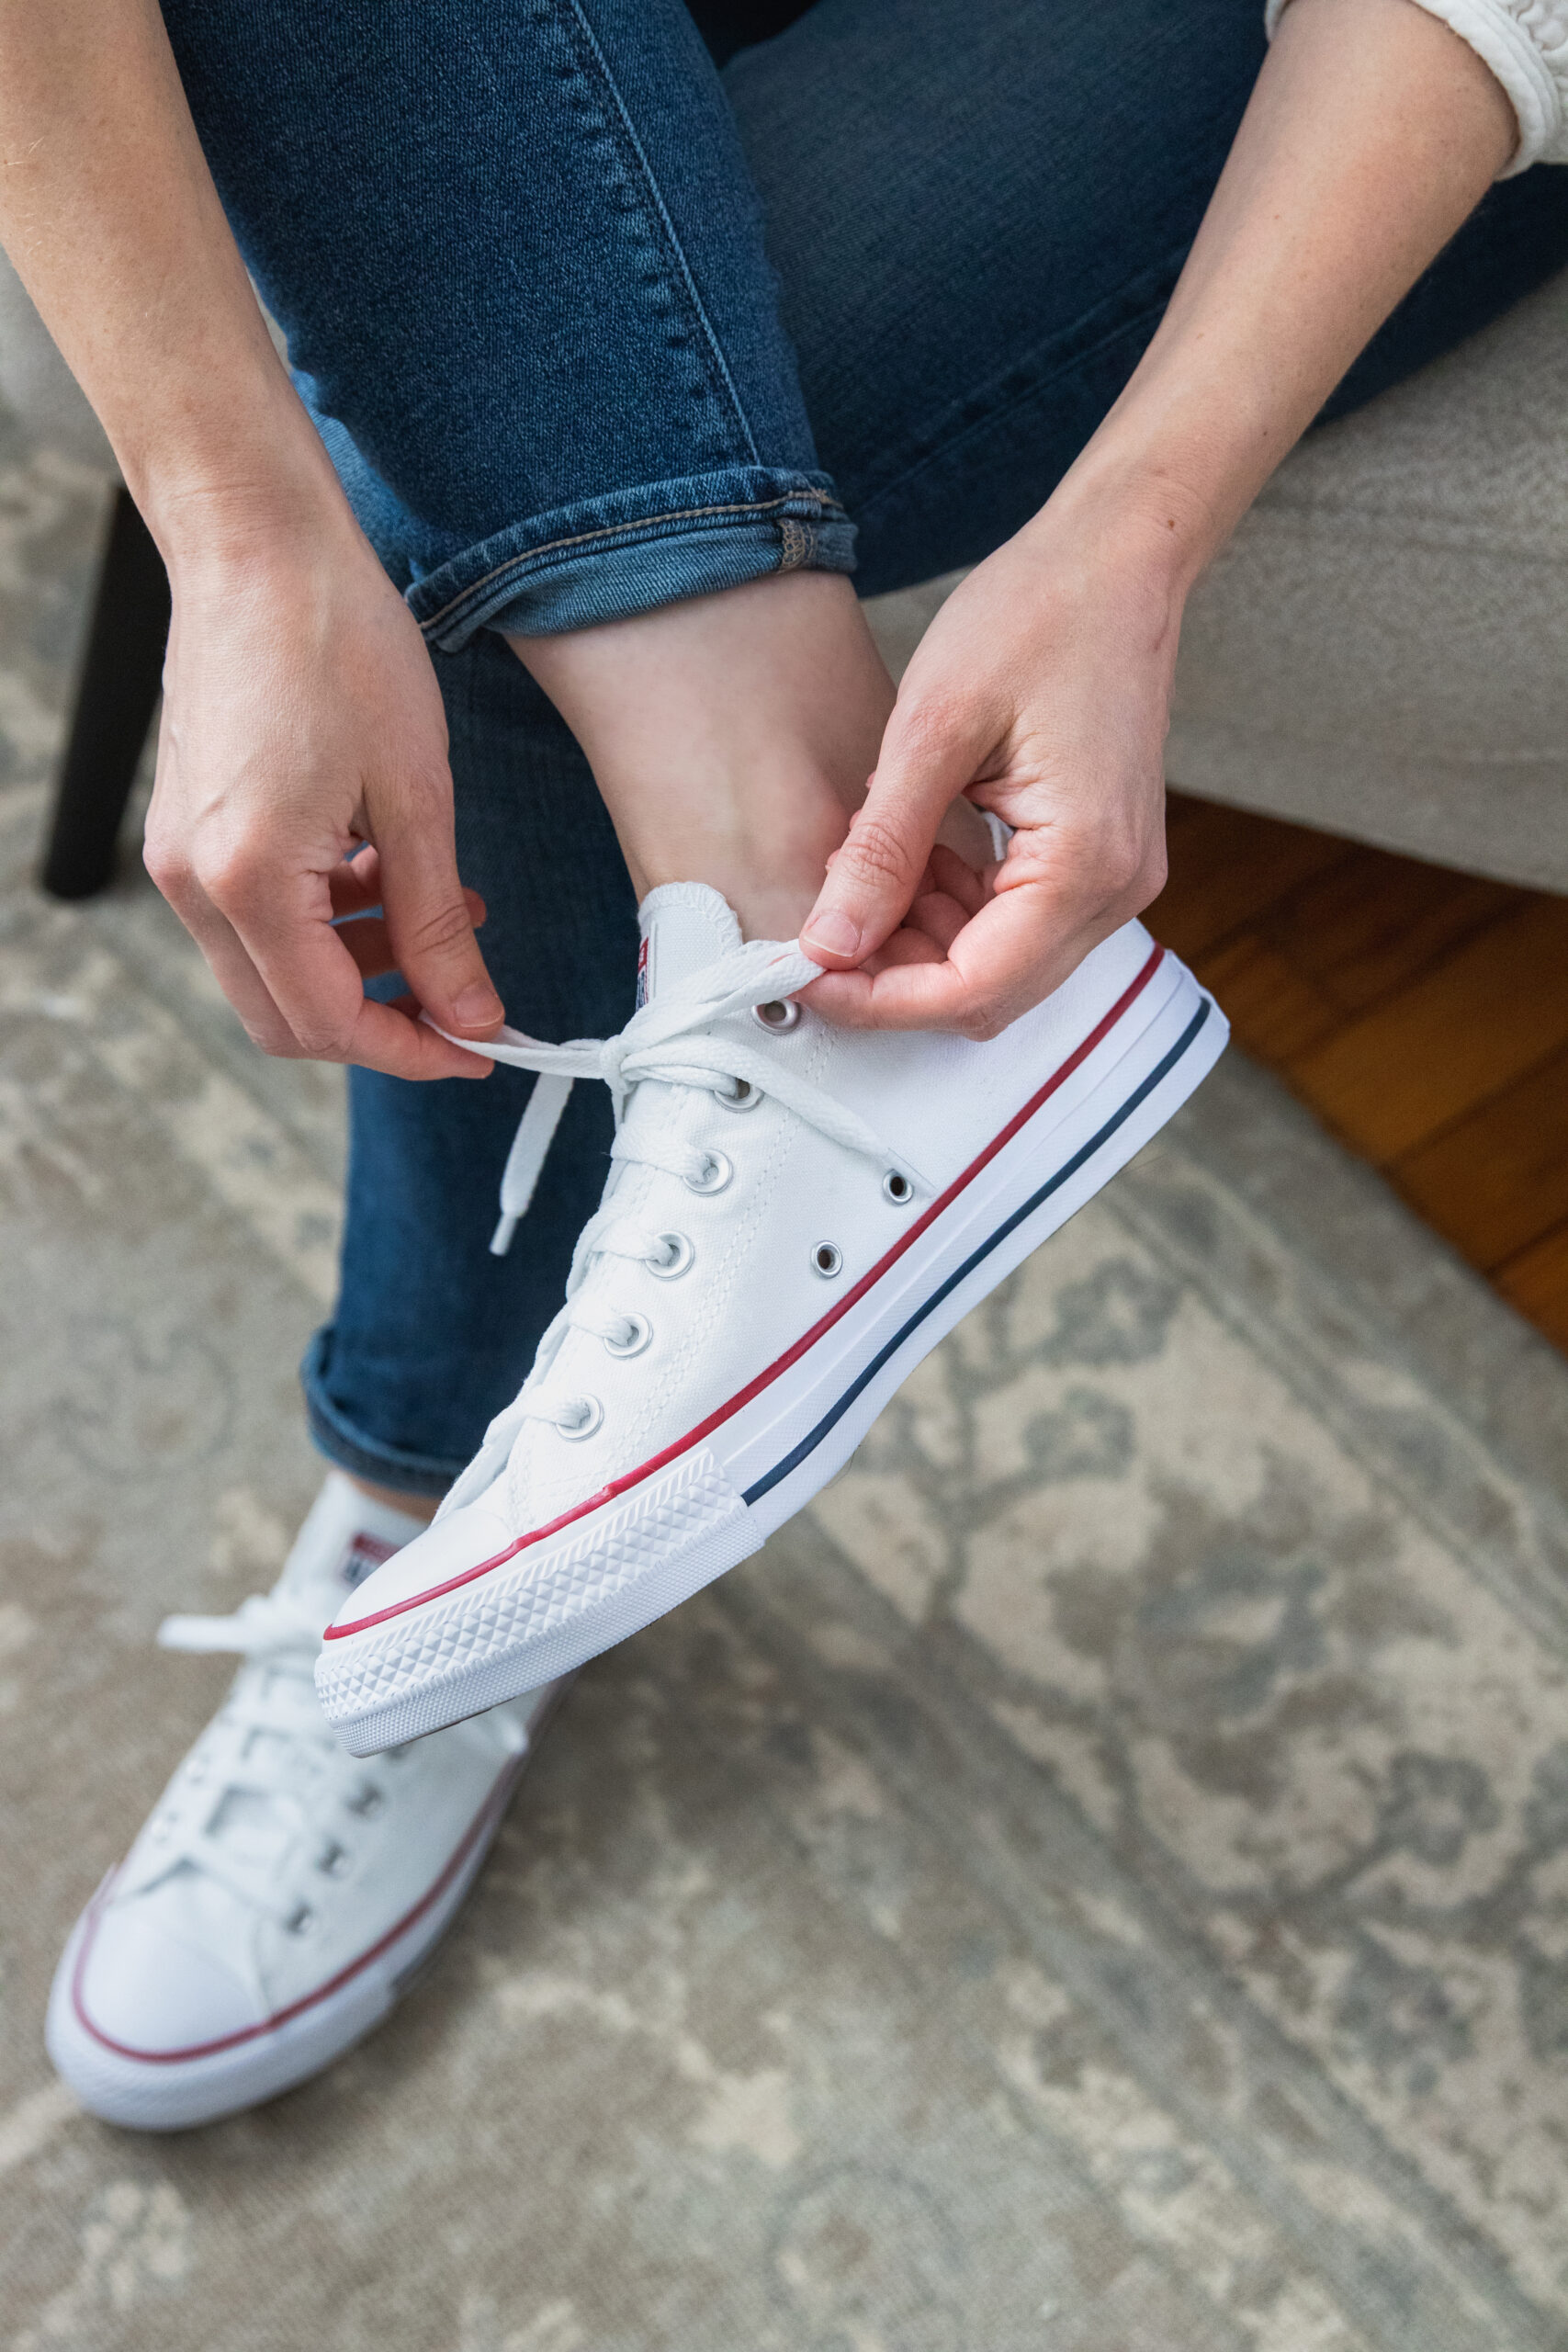 How to Clean White Converse | Hello Nest